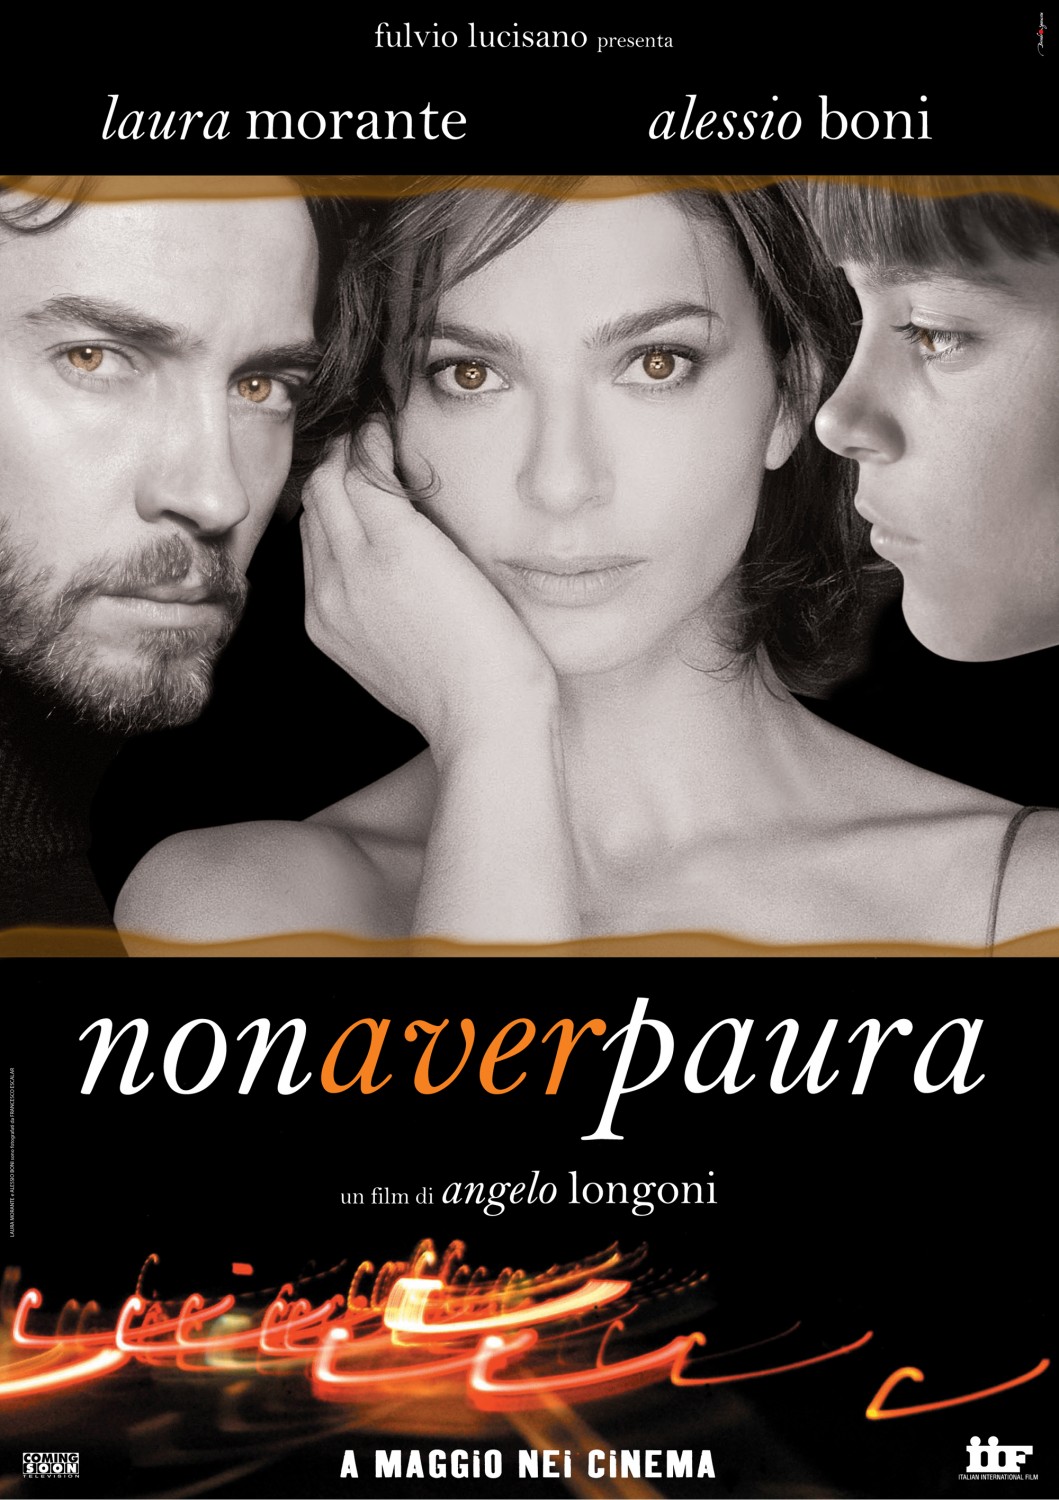 Extra Large Movie Poster Image for Non aver paura 